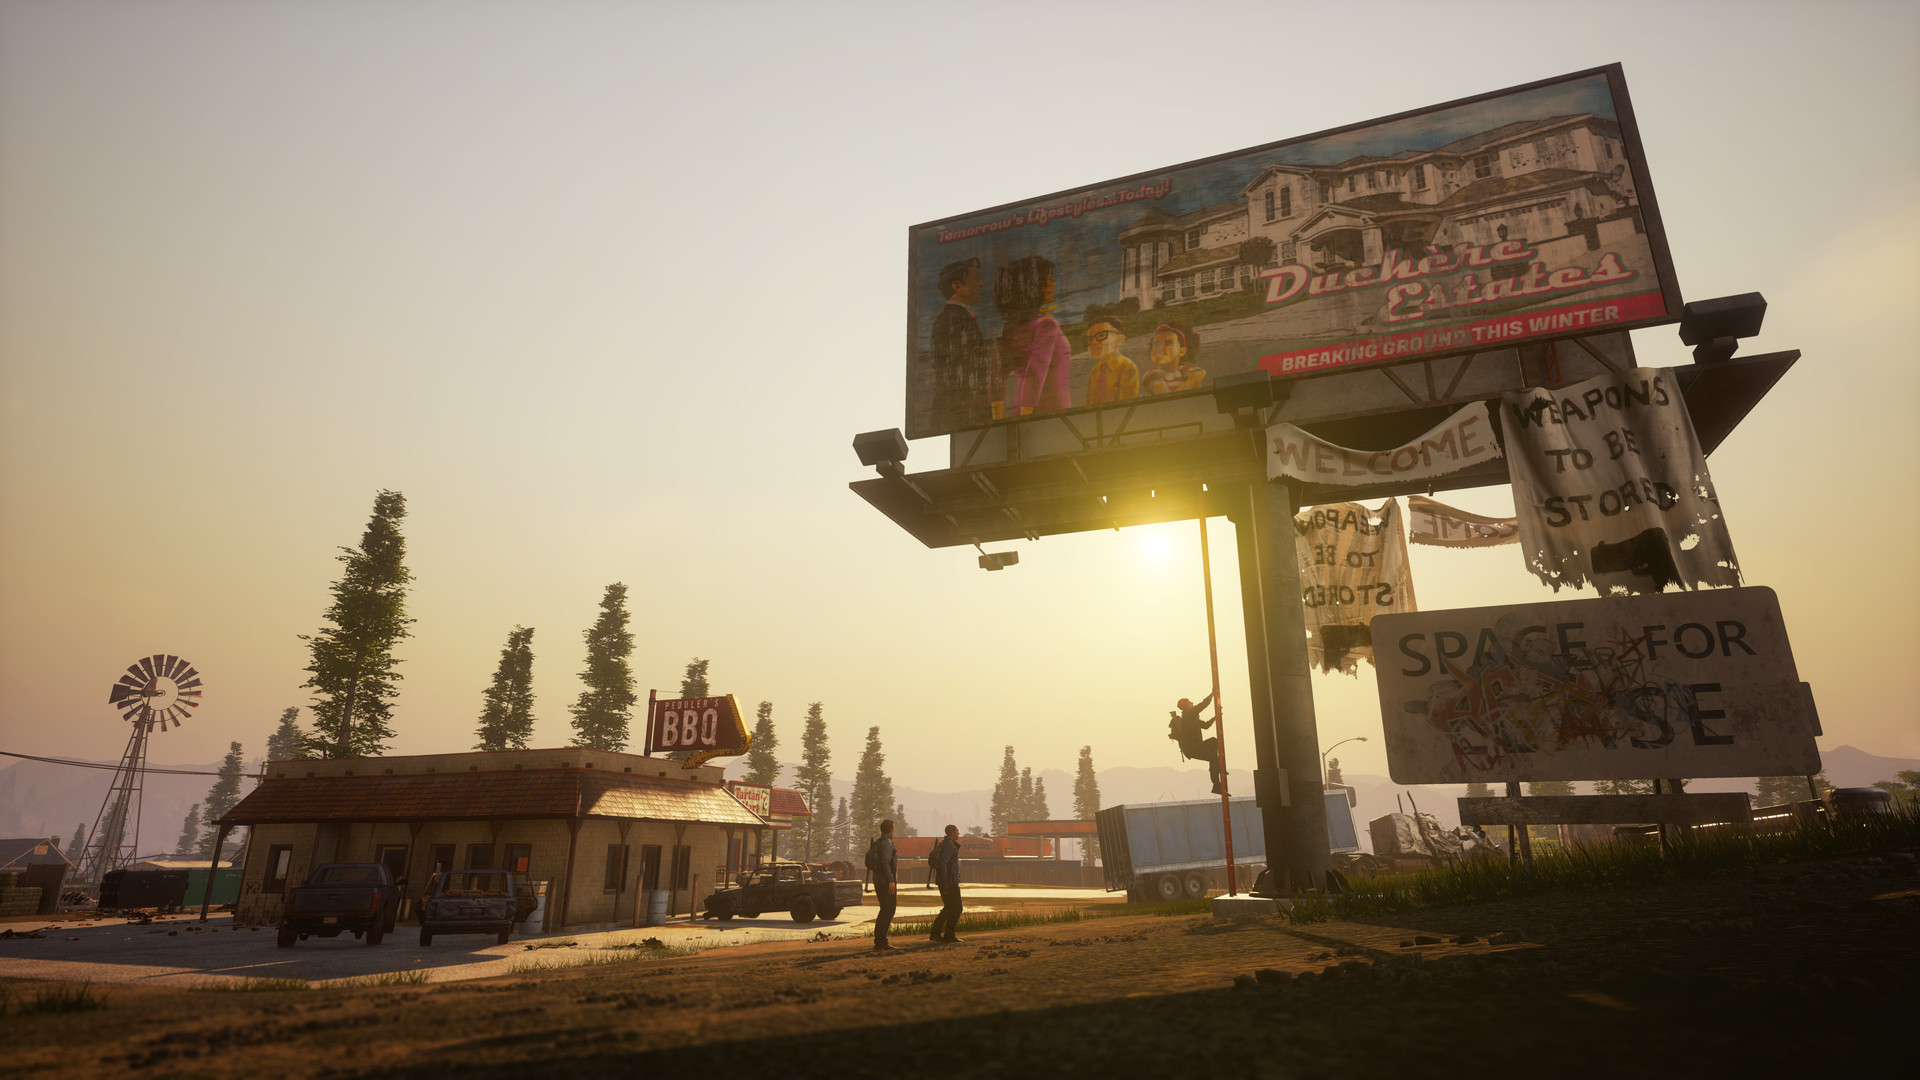 state of decay 2 mods